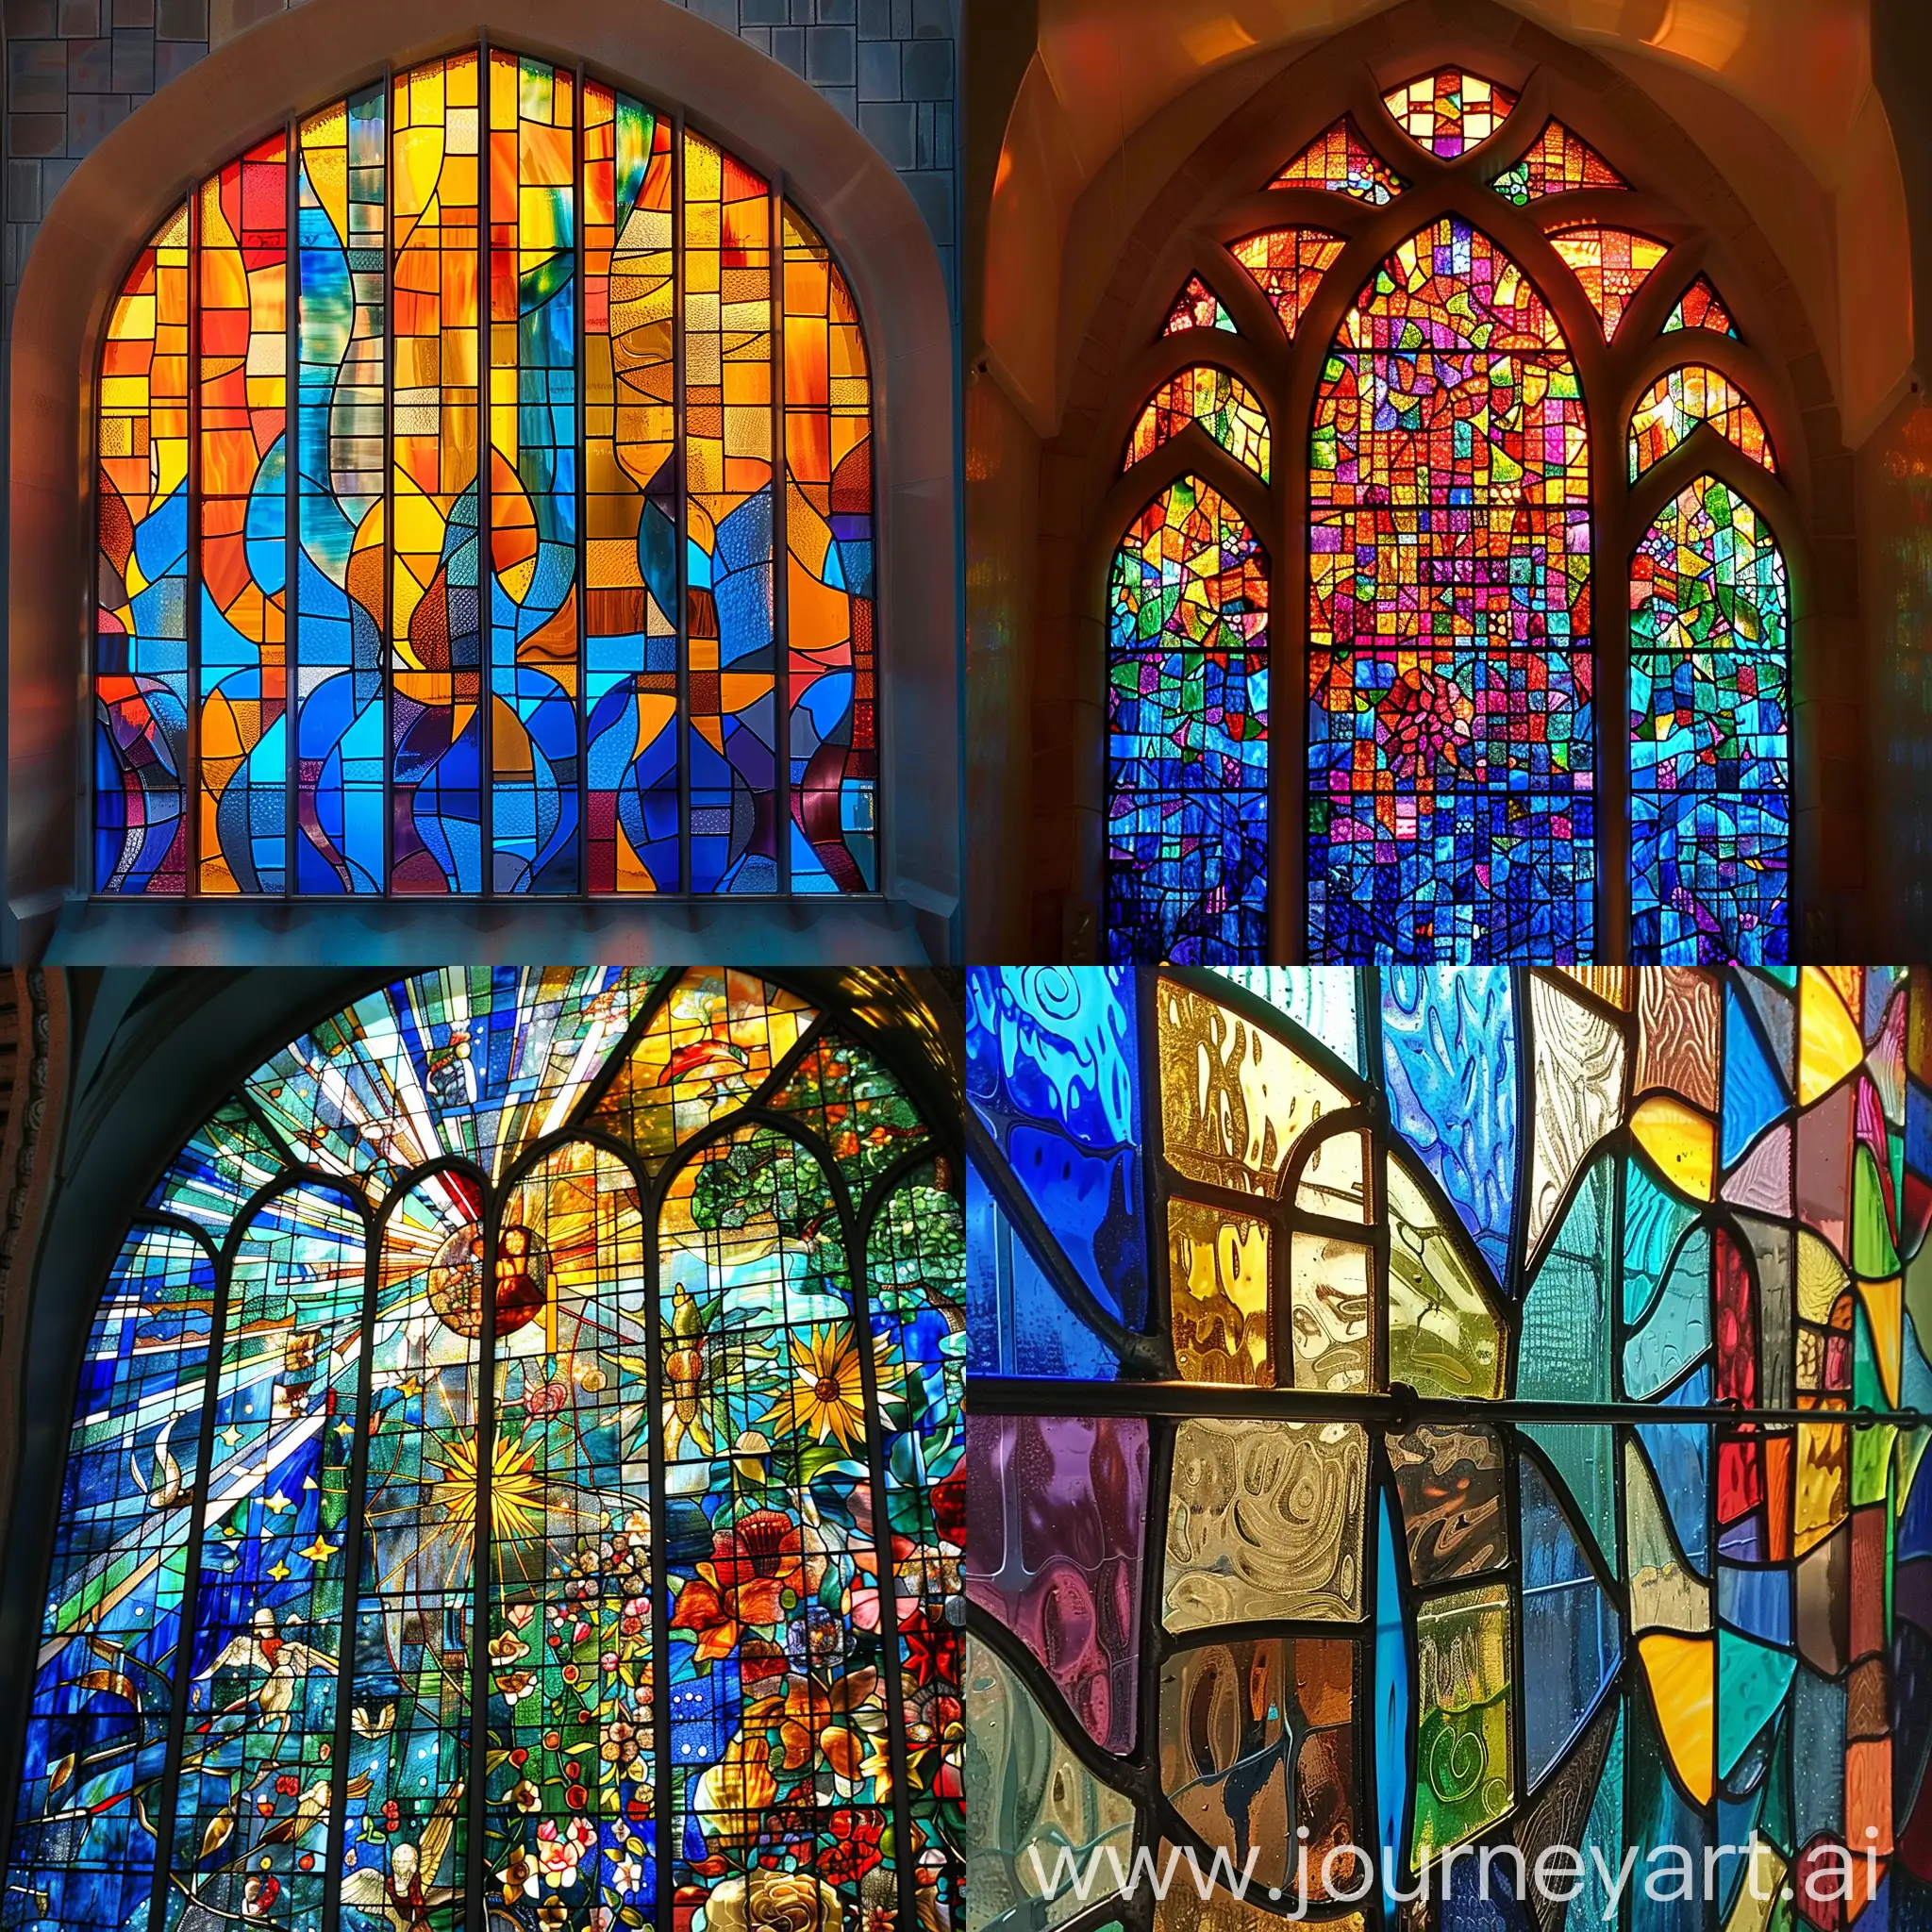 Vibrant-Stained-Glass-Artwork-Intricate-Patterns-and-Colorful-Designs